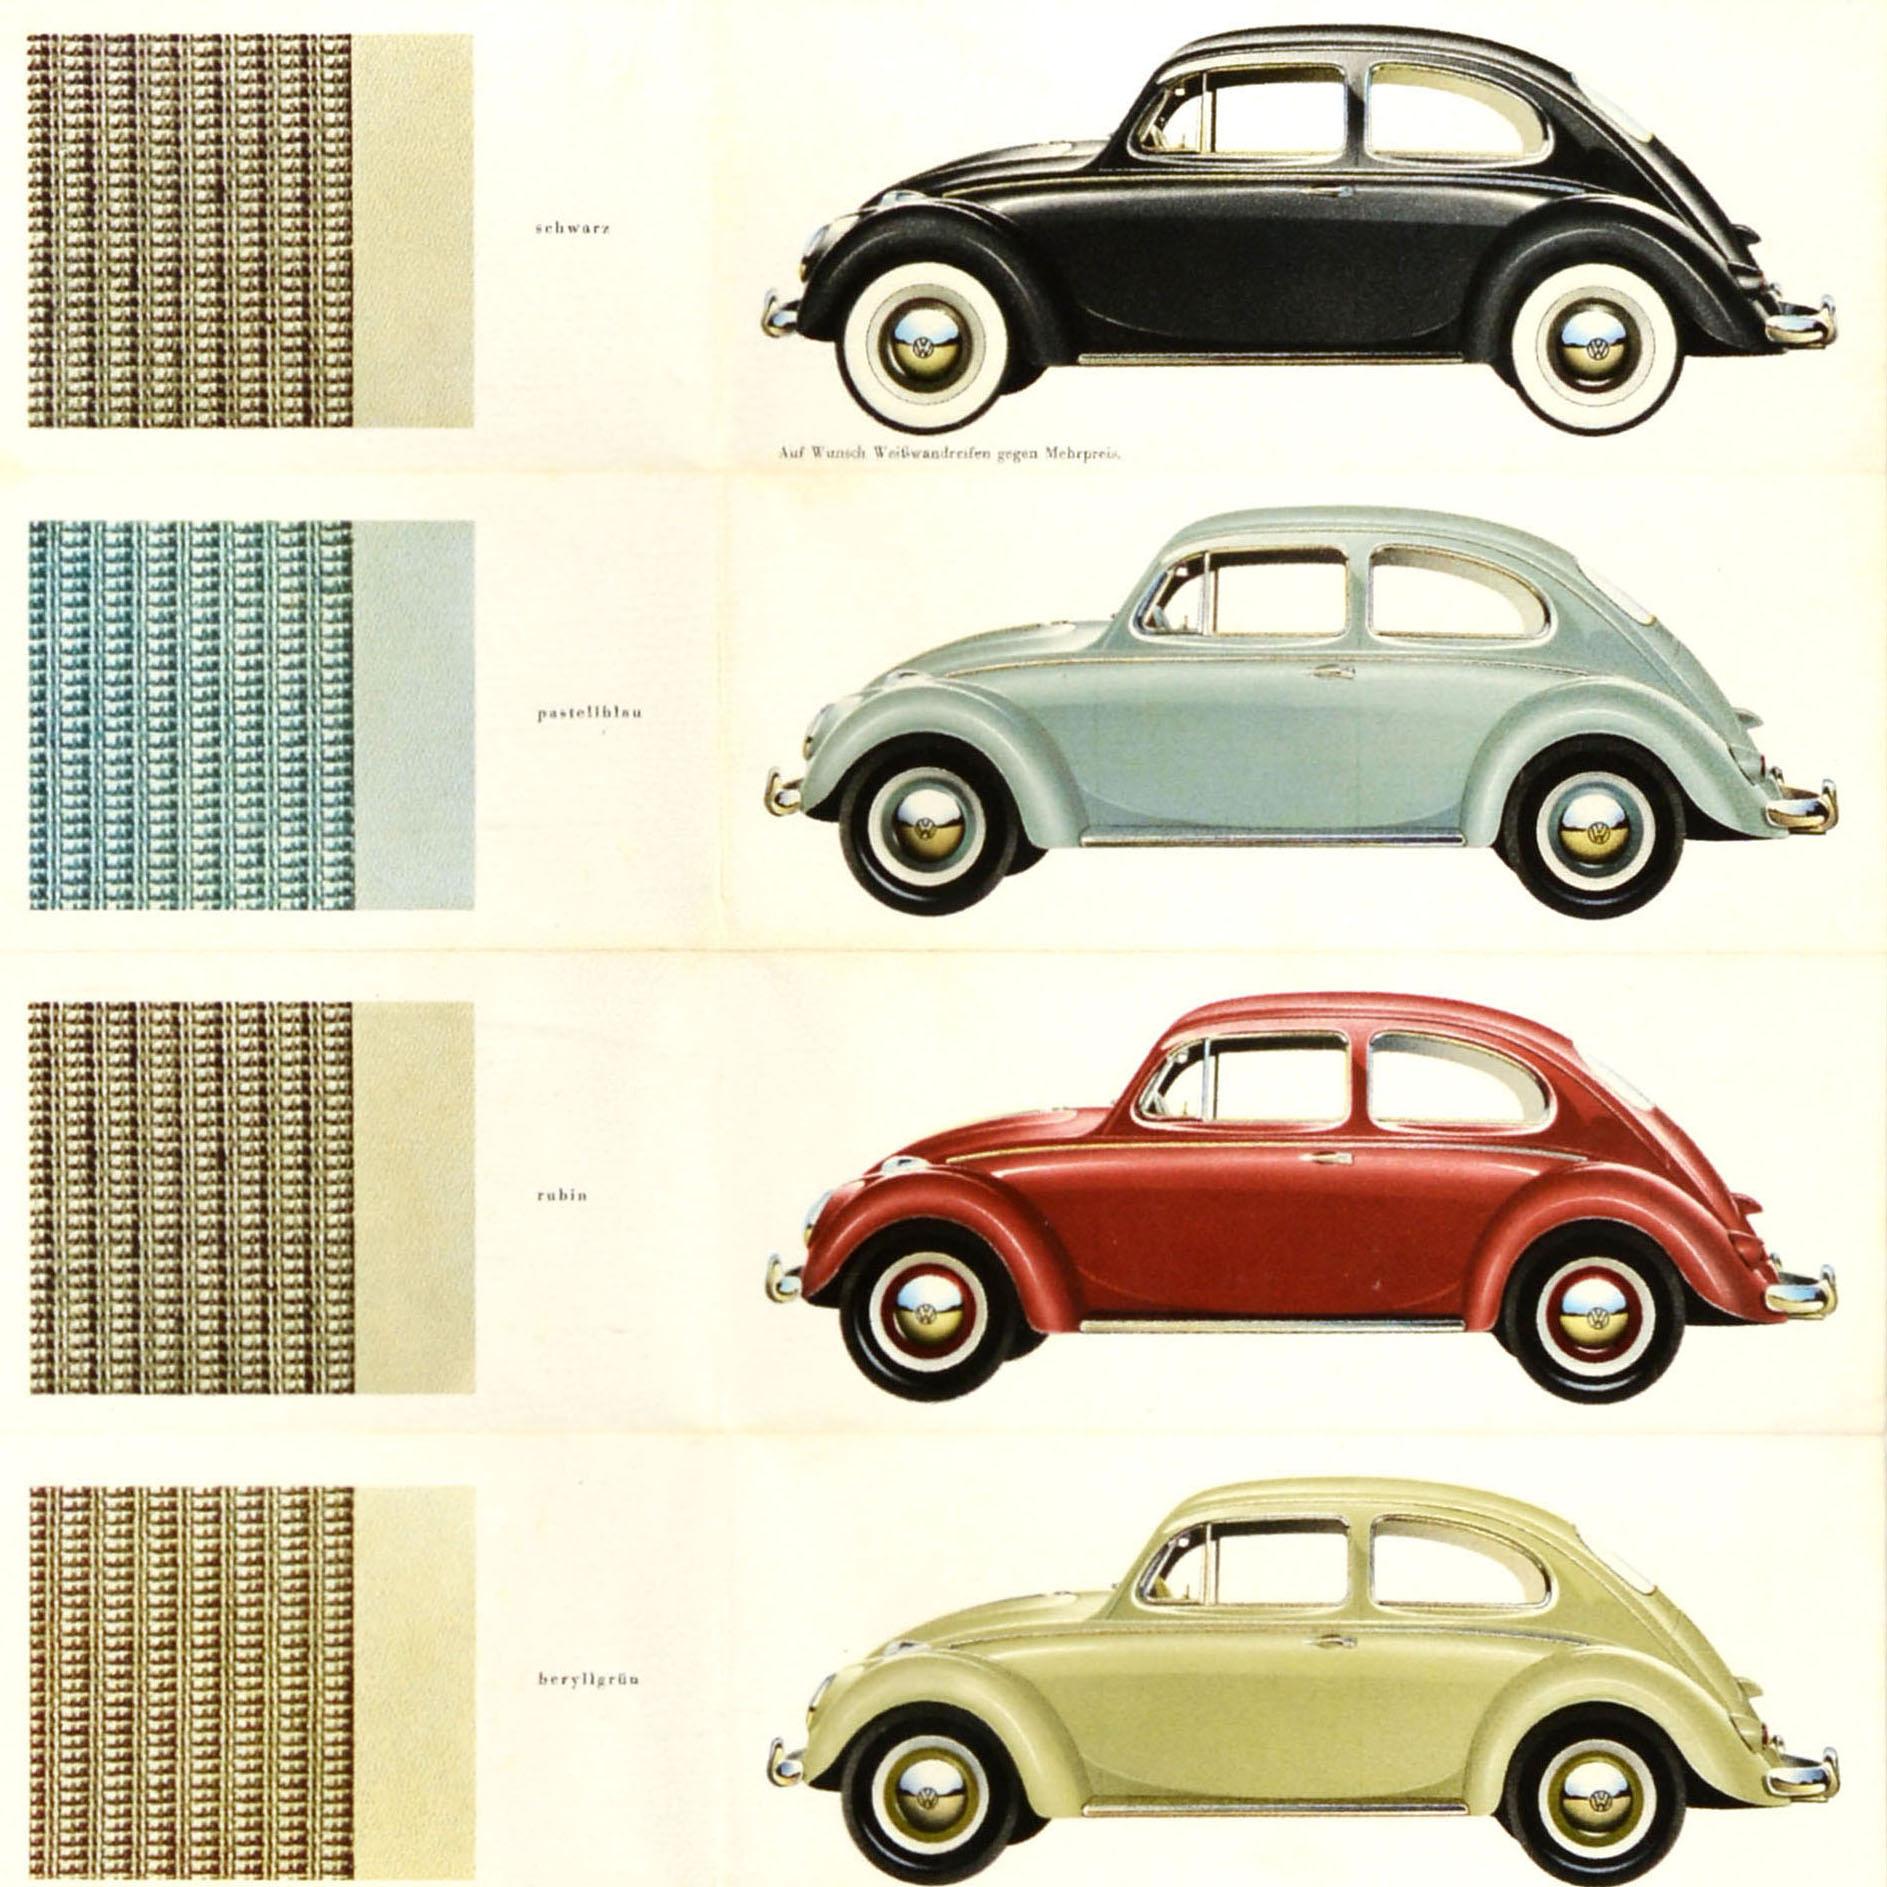 Original vintage Volkswagen car advertising poster - VW Limousine - featuring images of the car in different colours including black, pale blue, ruby red and pearl white with a note - Auf wunsch Weißwandreifen gegen Mehrpreis / White wall tyres